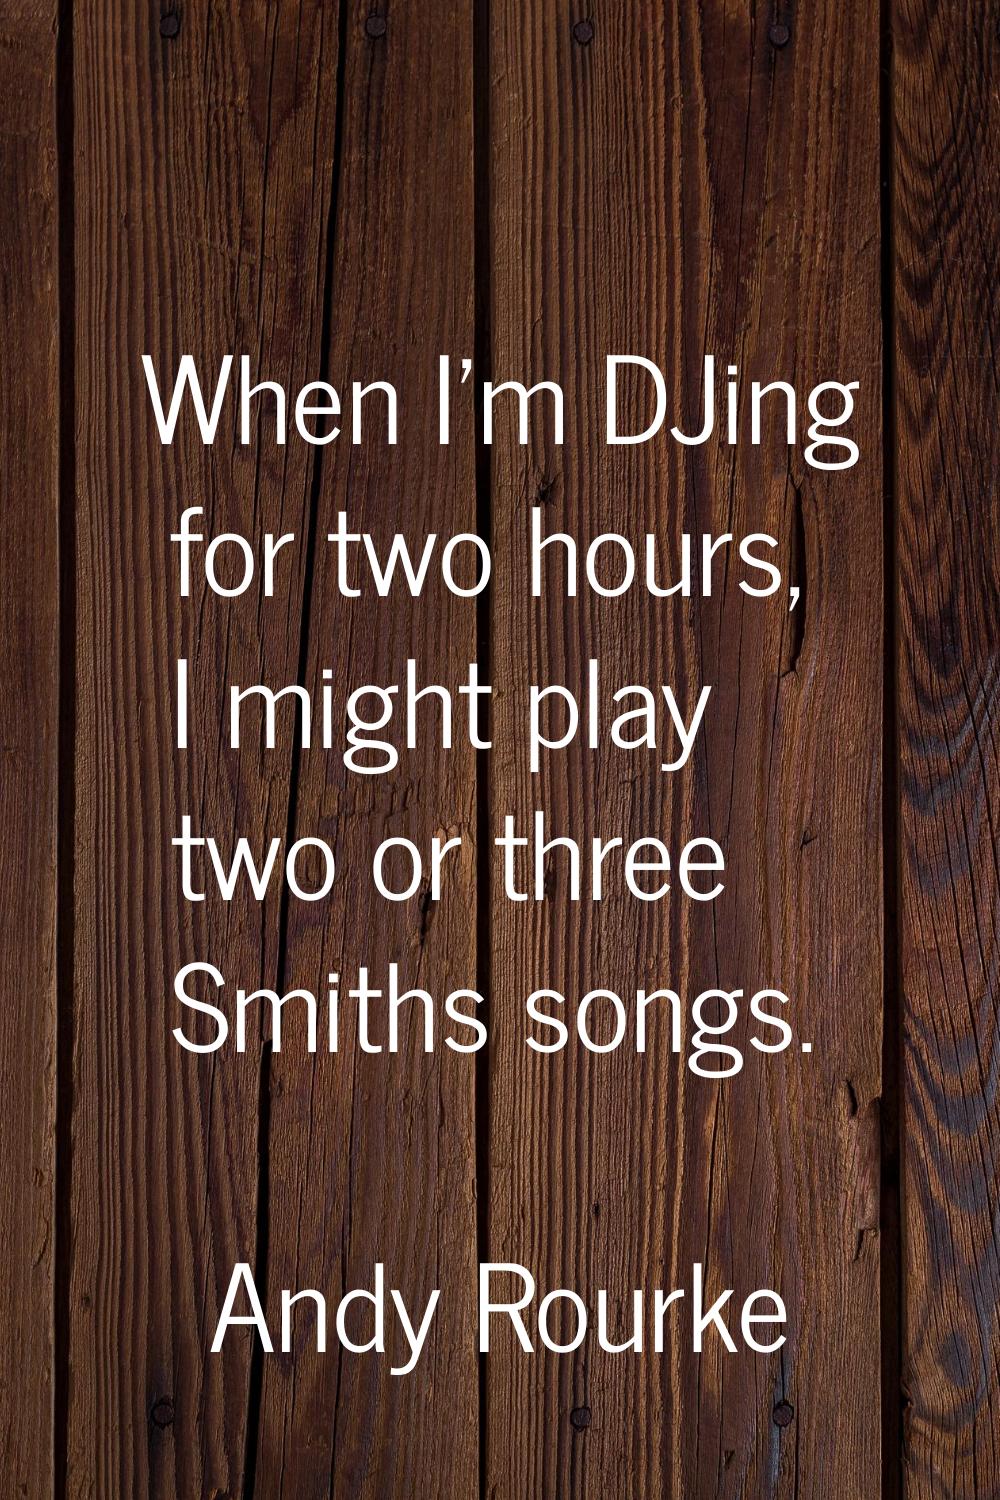 When I'm DJing for two hours, I might play two or three Smiths songs.